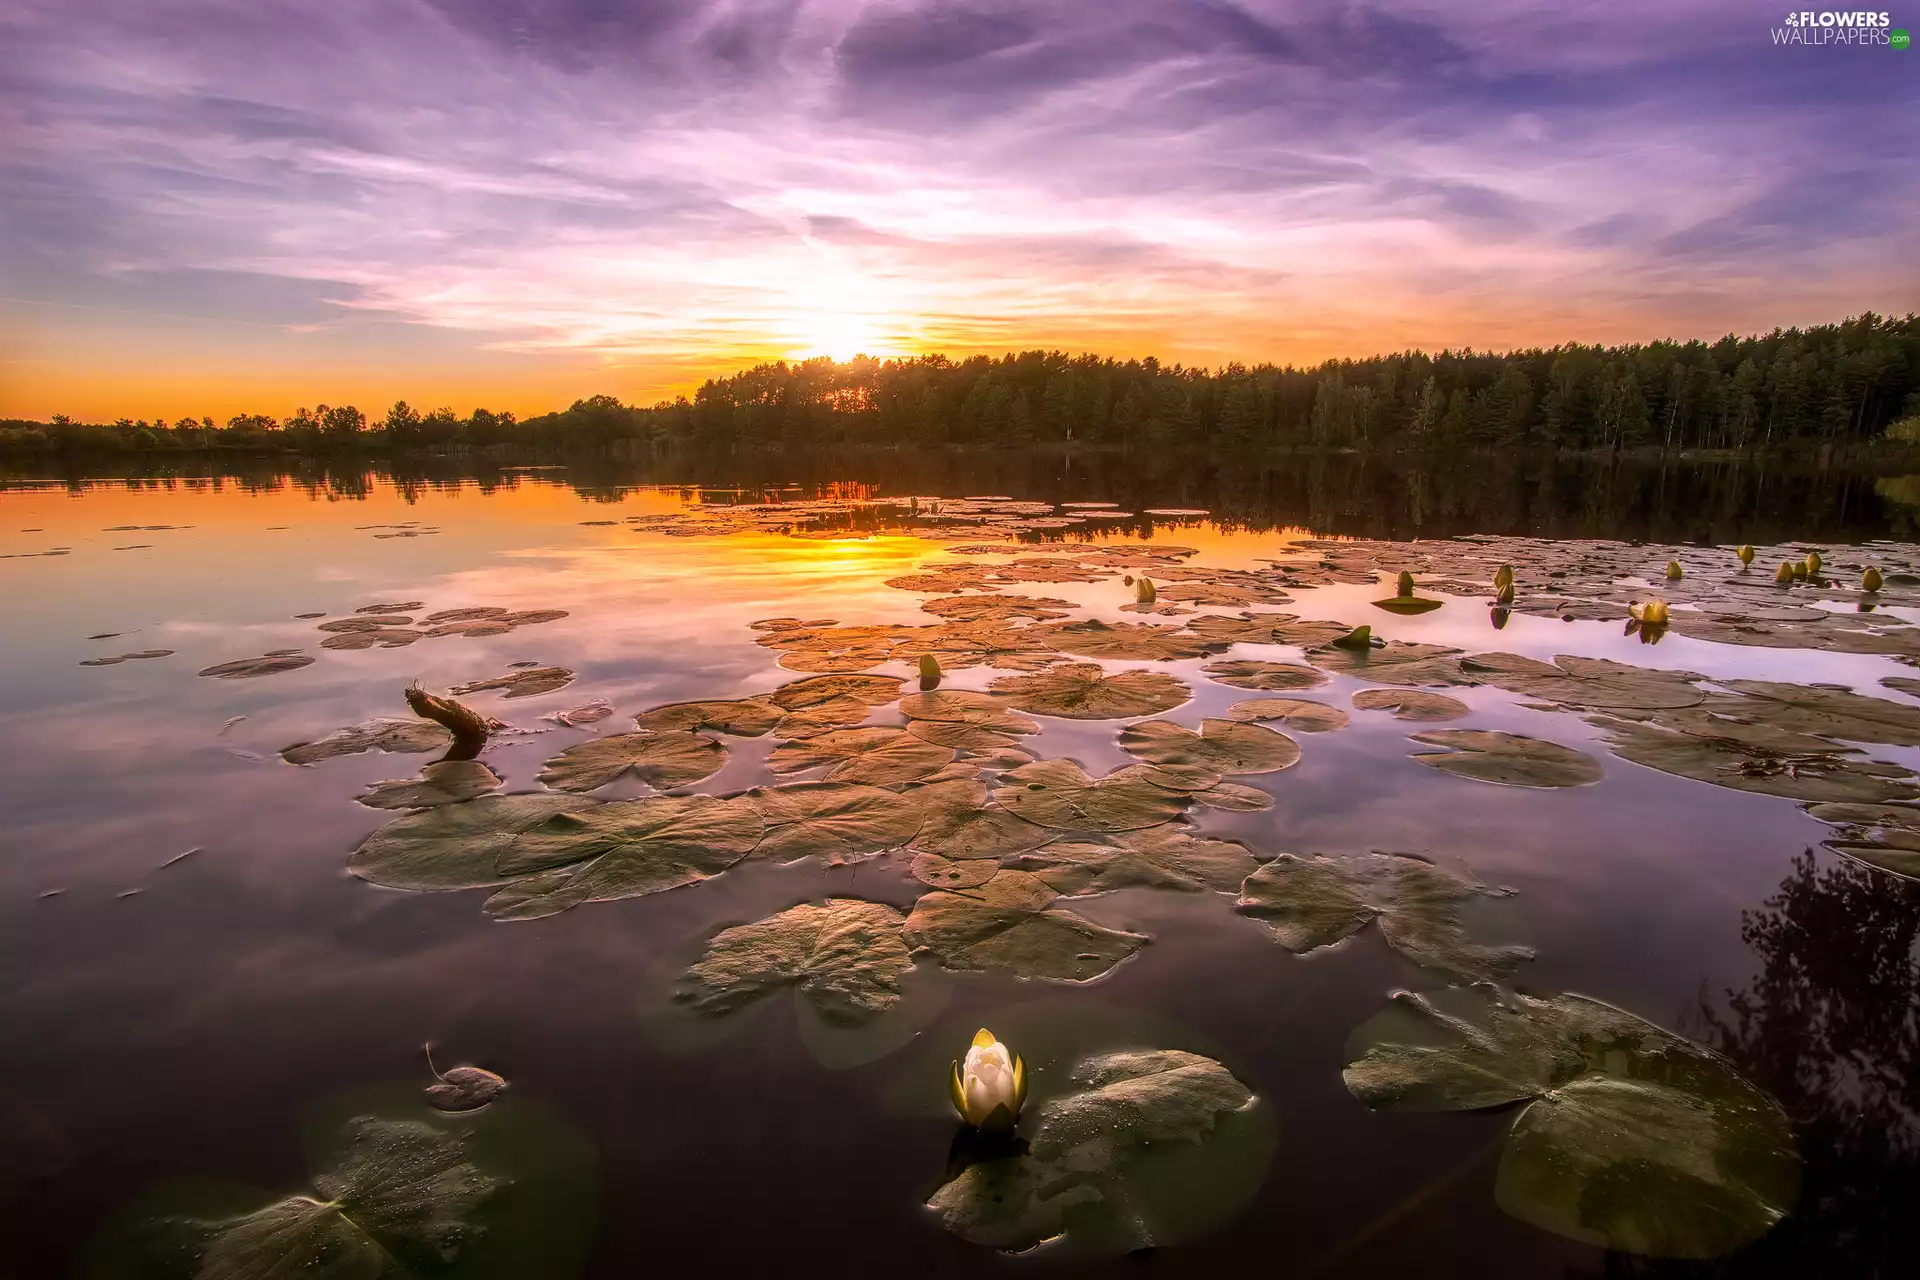 Leaf, lake, Water lilies, Sunrise, Flowers, forest